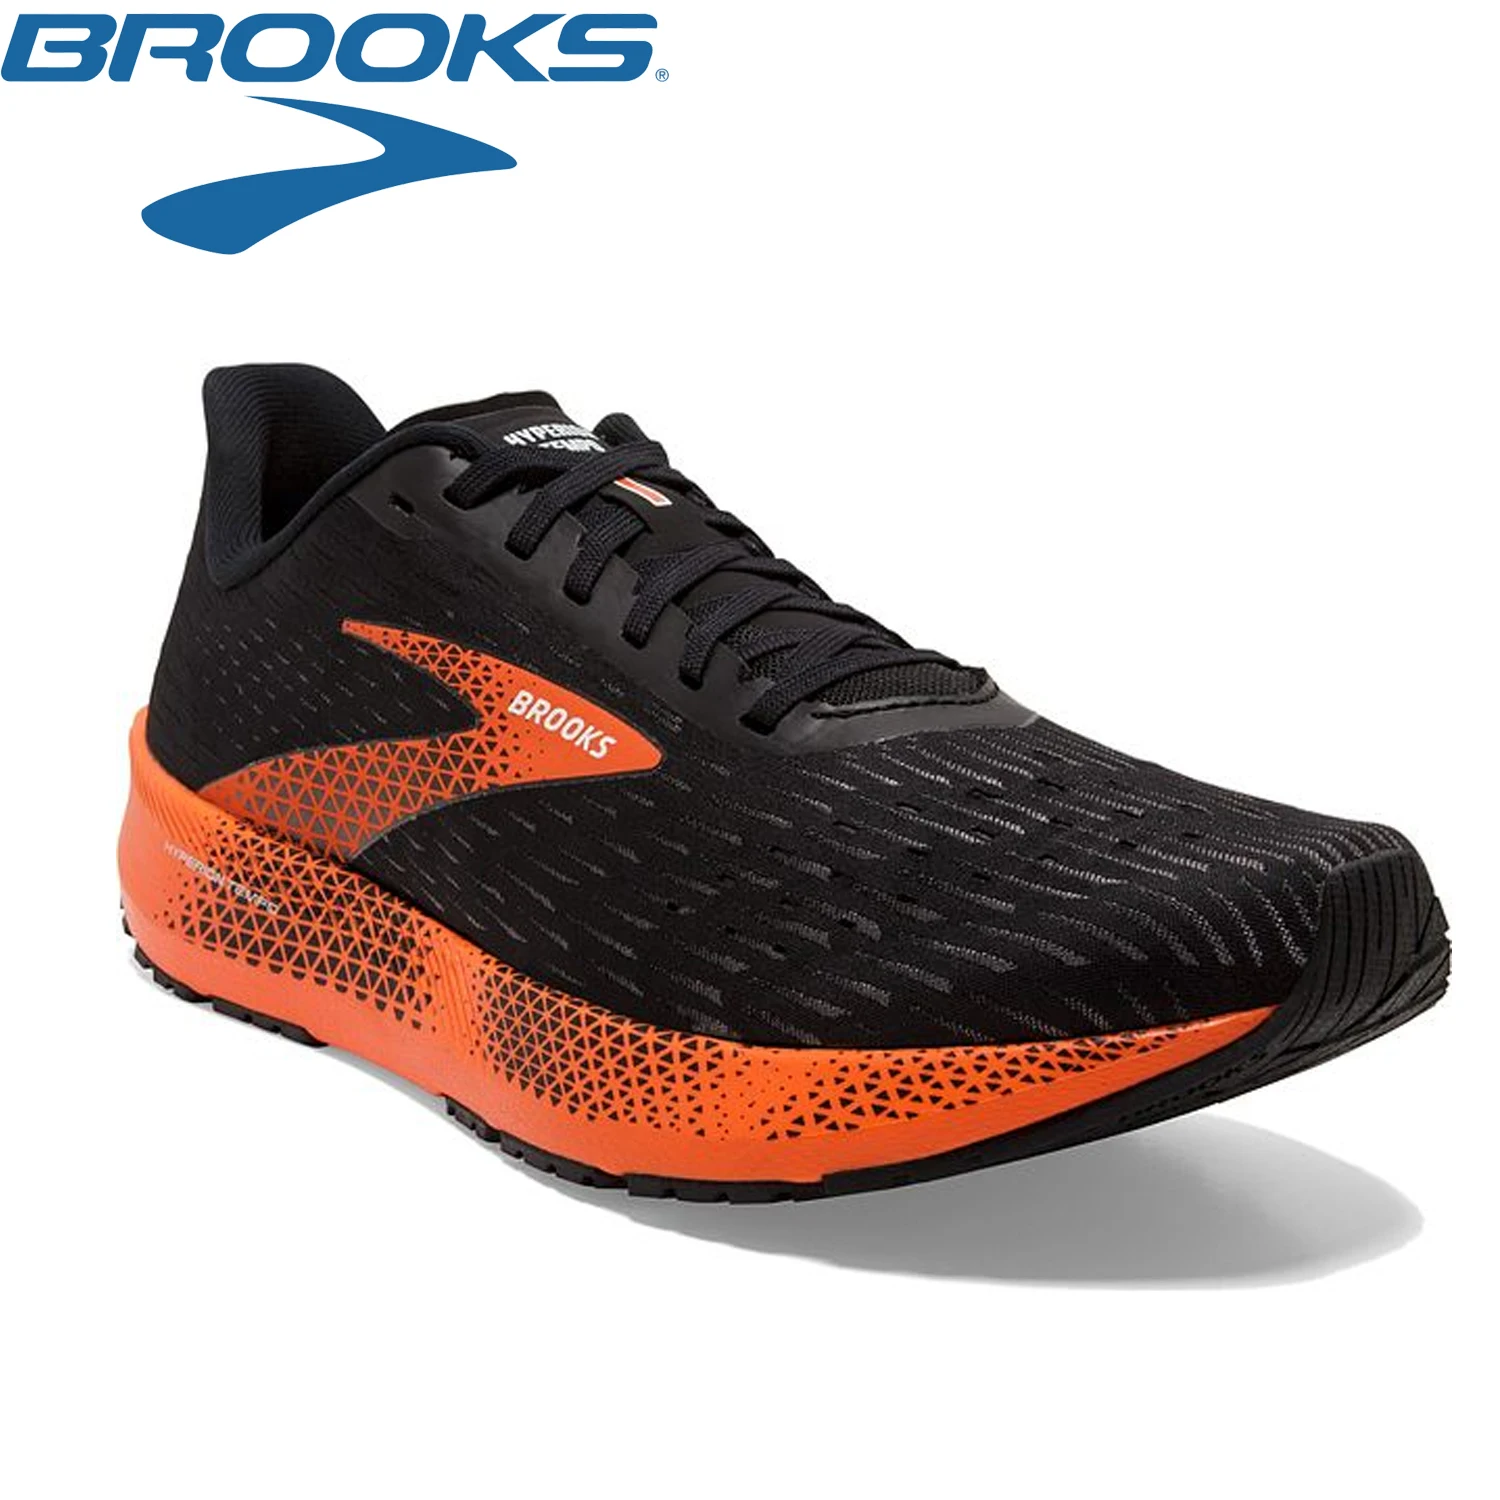 

BROOKS Running Shoes Men Hyperion Tempo Lightweight Cushioning Marathon Sneakers Road Race Training Sports shoes for men